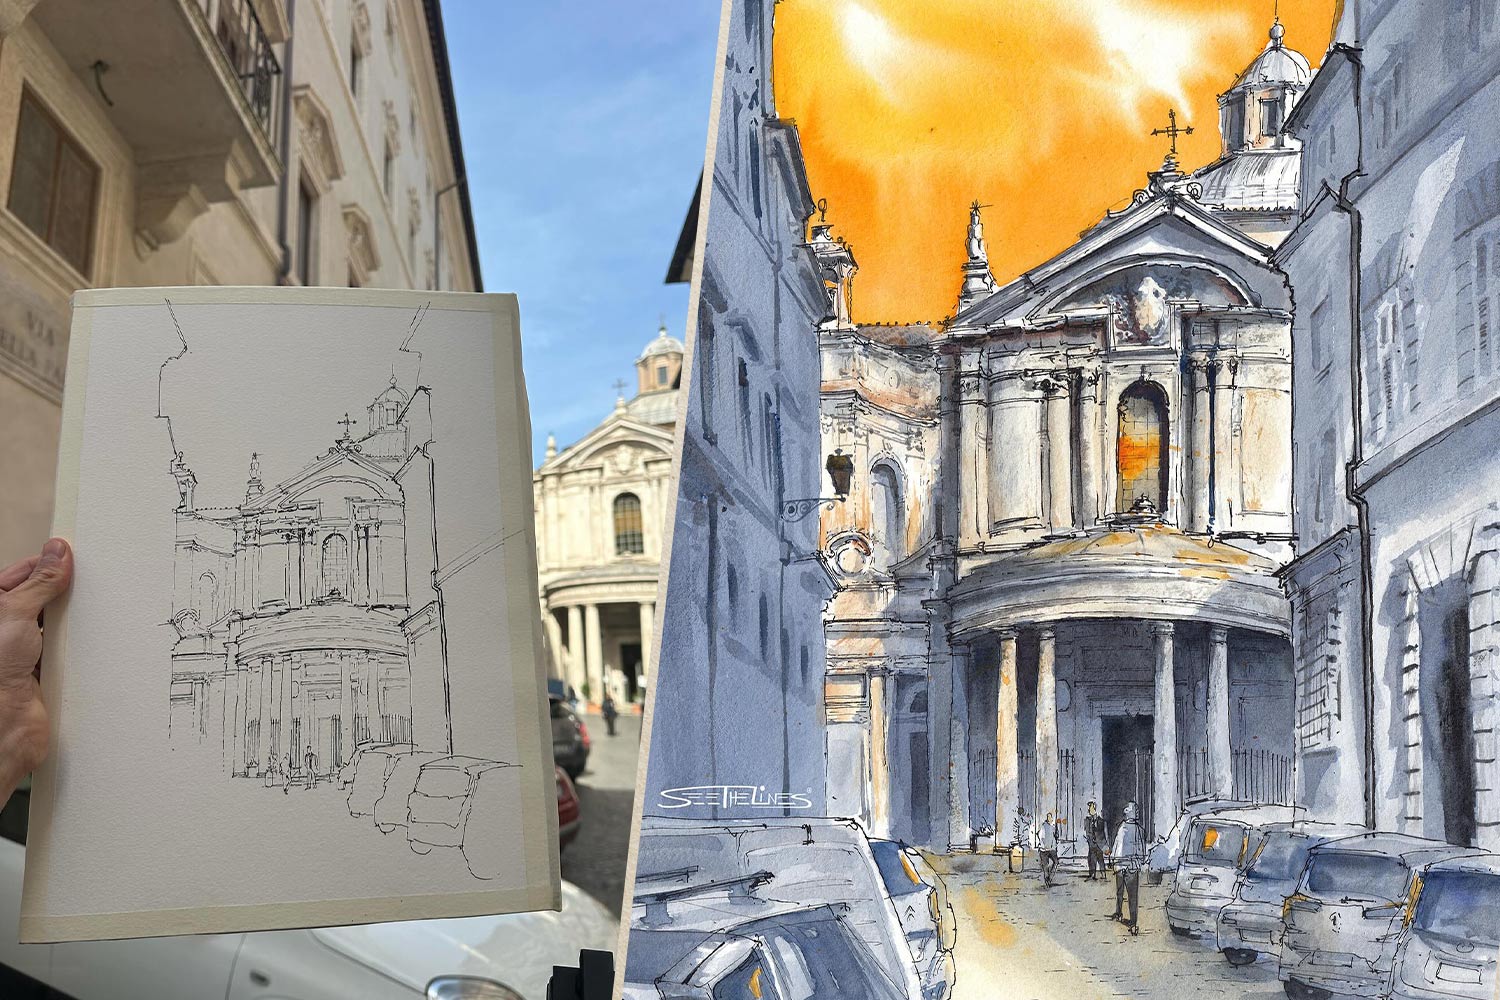 Collage of the early stages of a sketch vs. the finished sketched